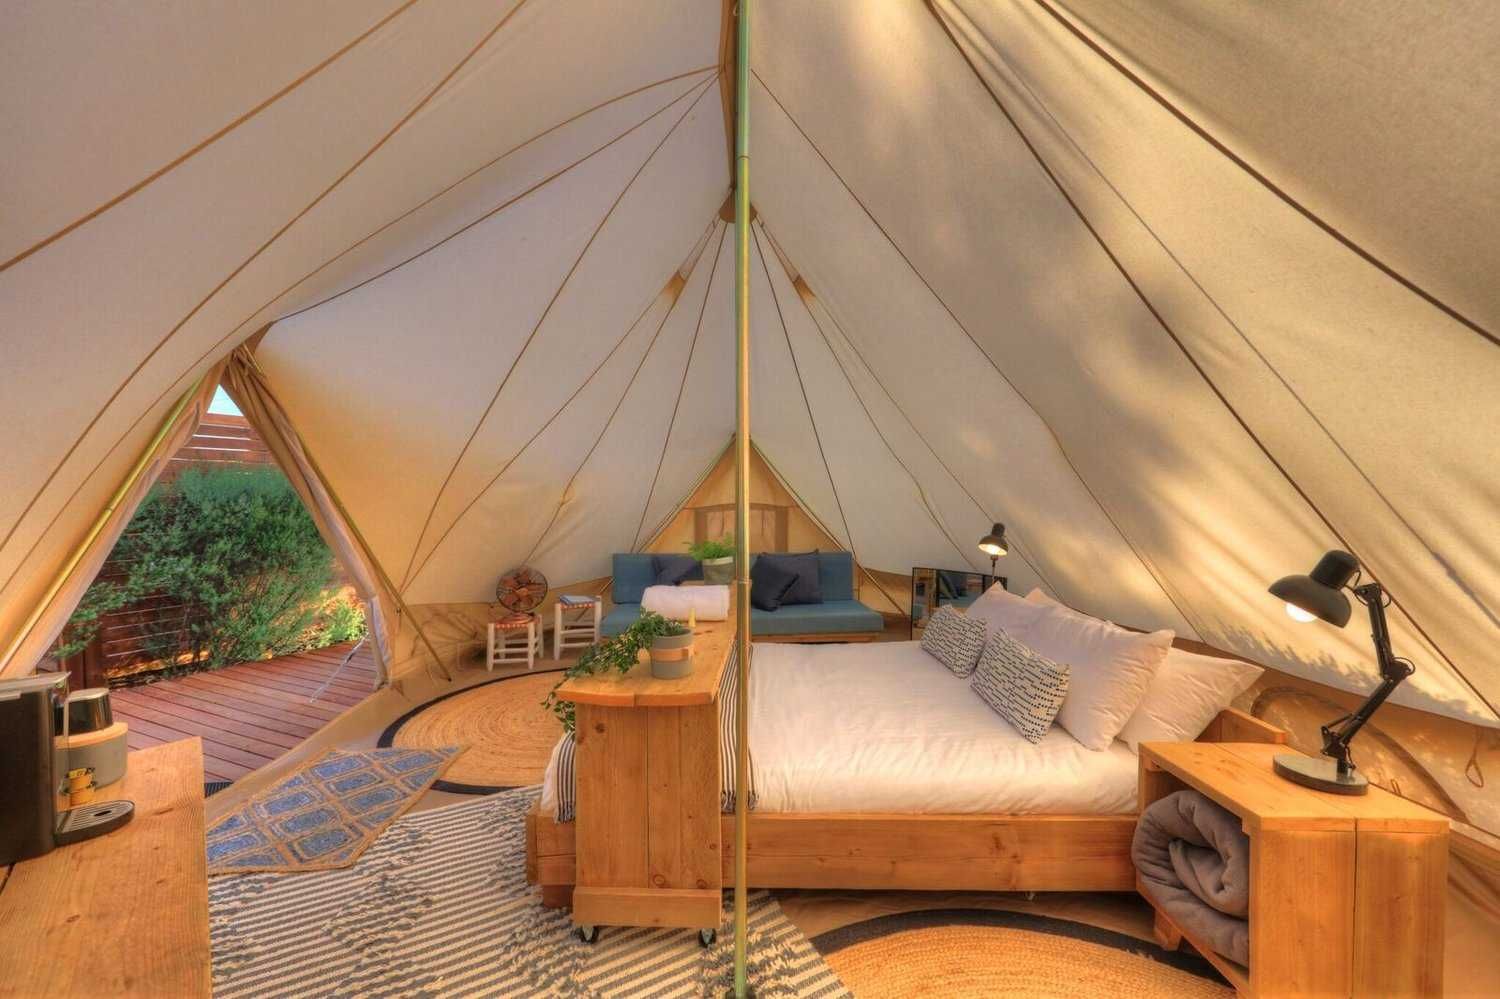 Cort Emperor,24 mp, OXFORD, glamping,camping, in stoc,promoție.